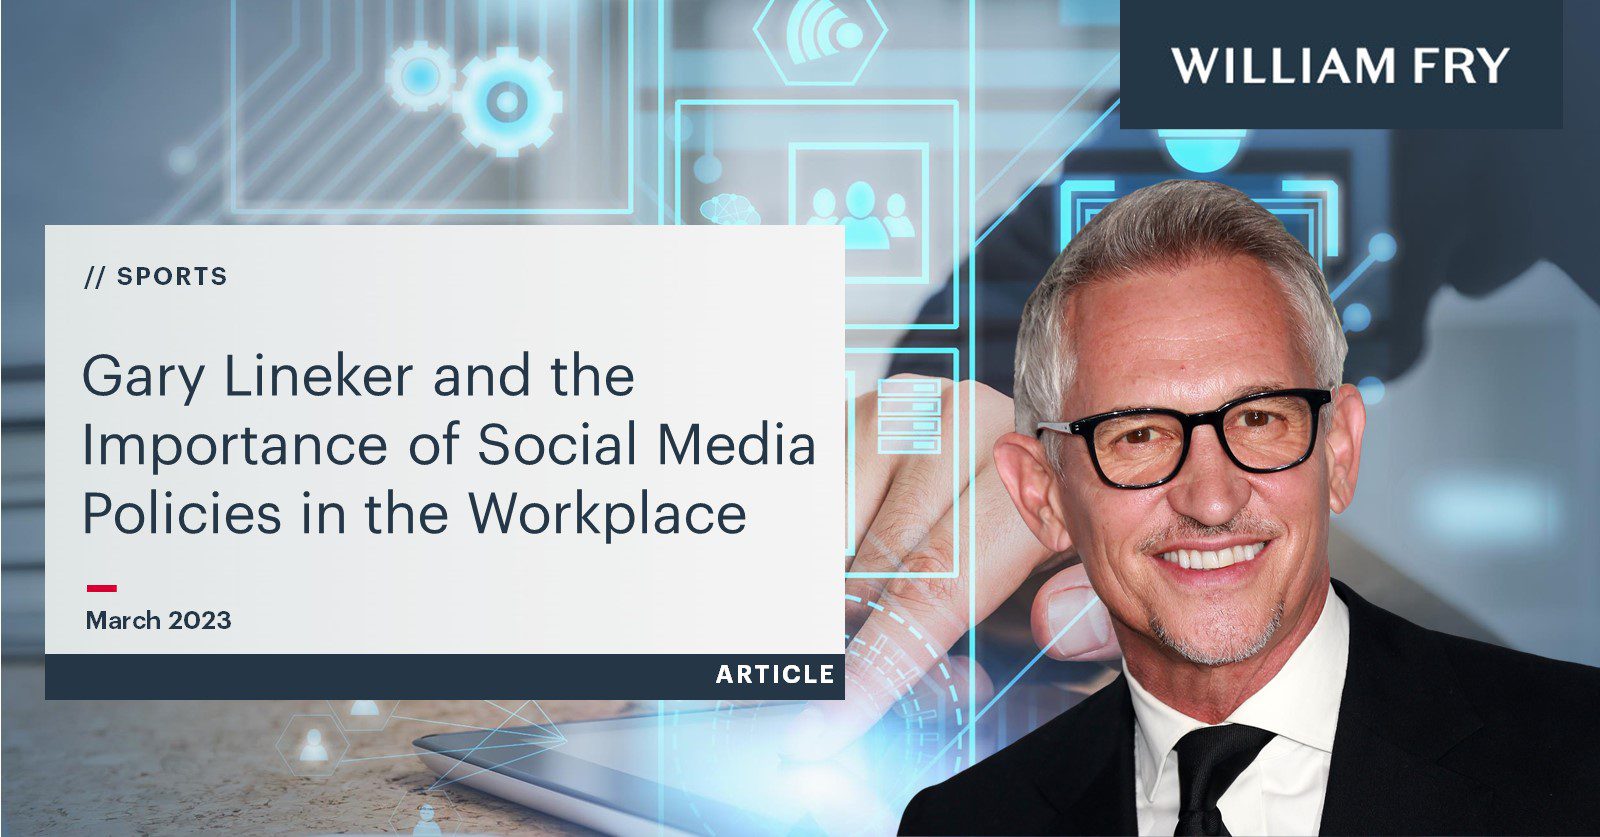 Gary Lineker and the Importance of Social Media Policies in the Workplace